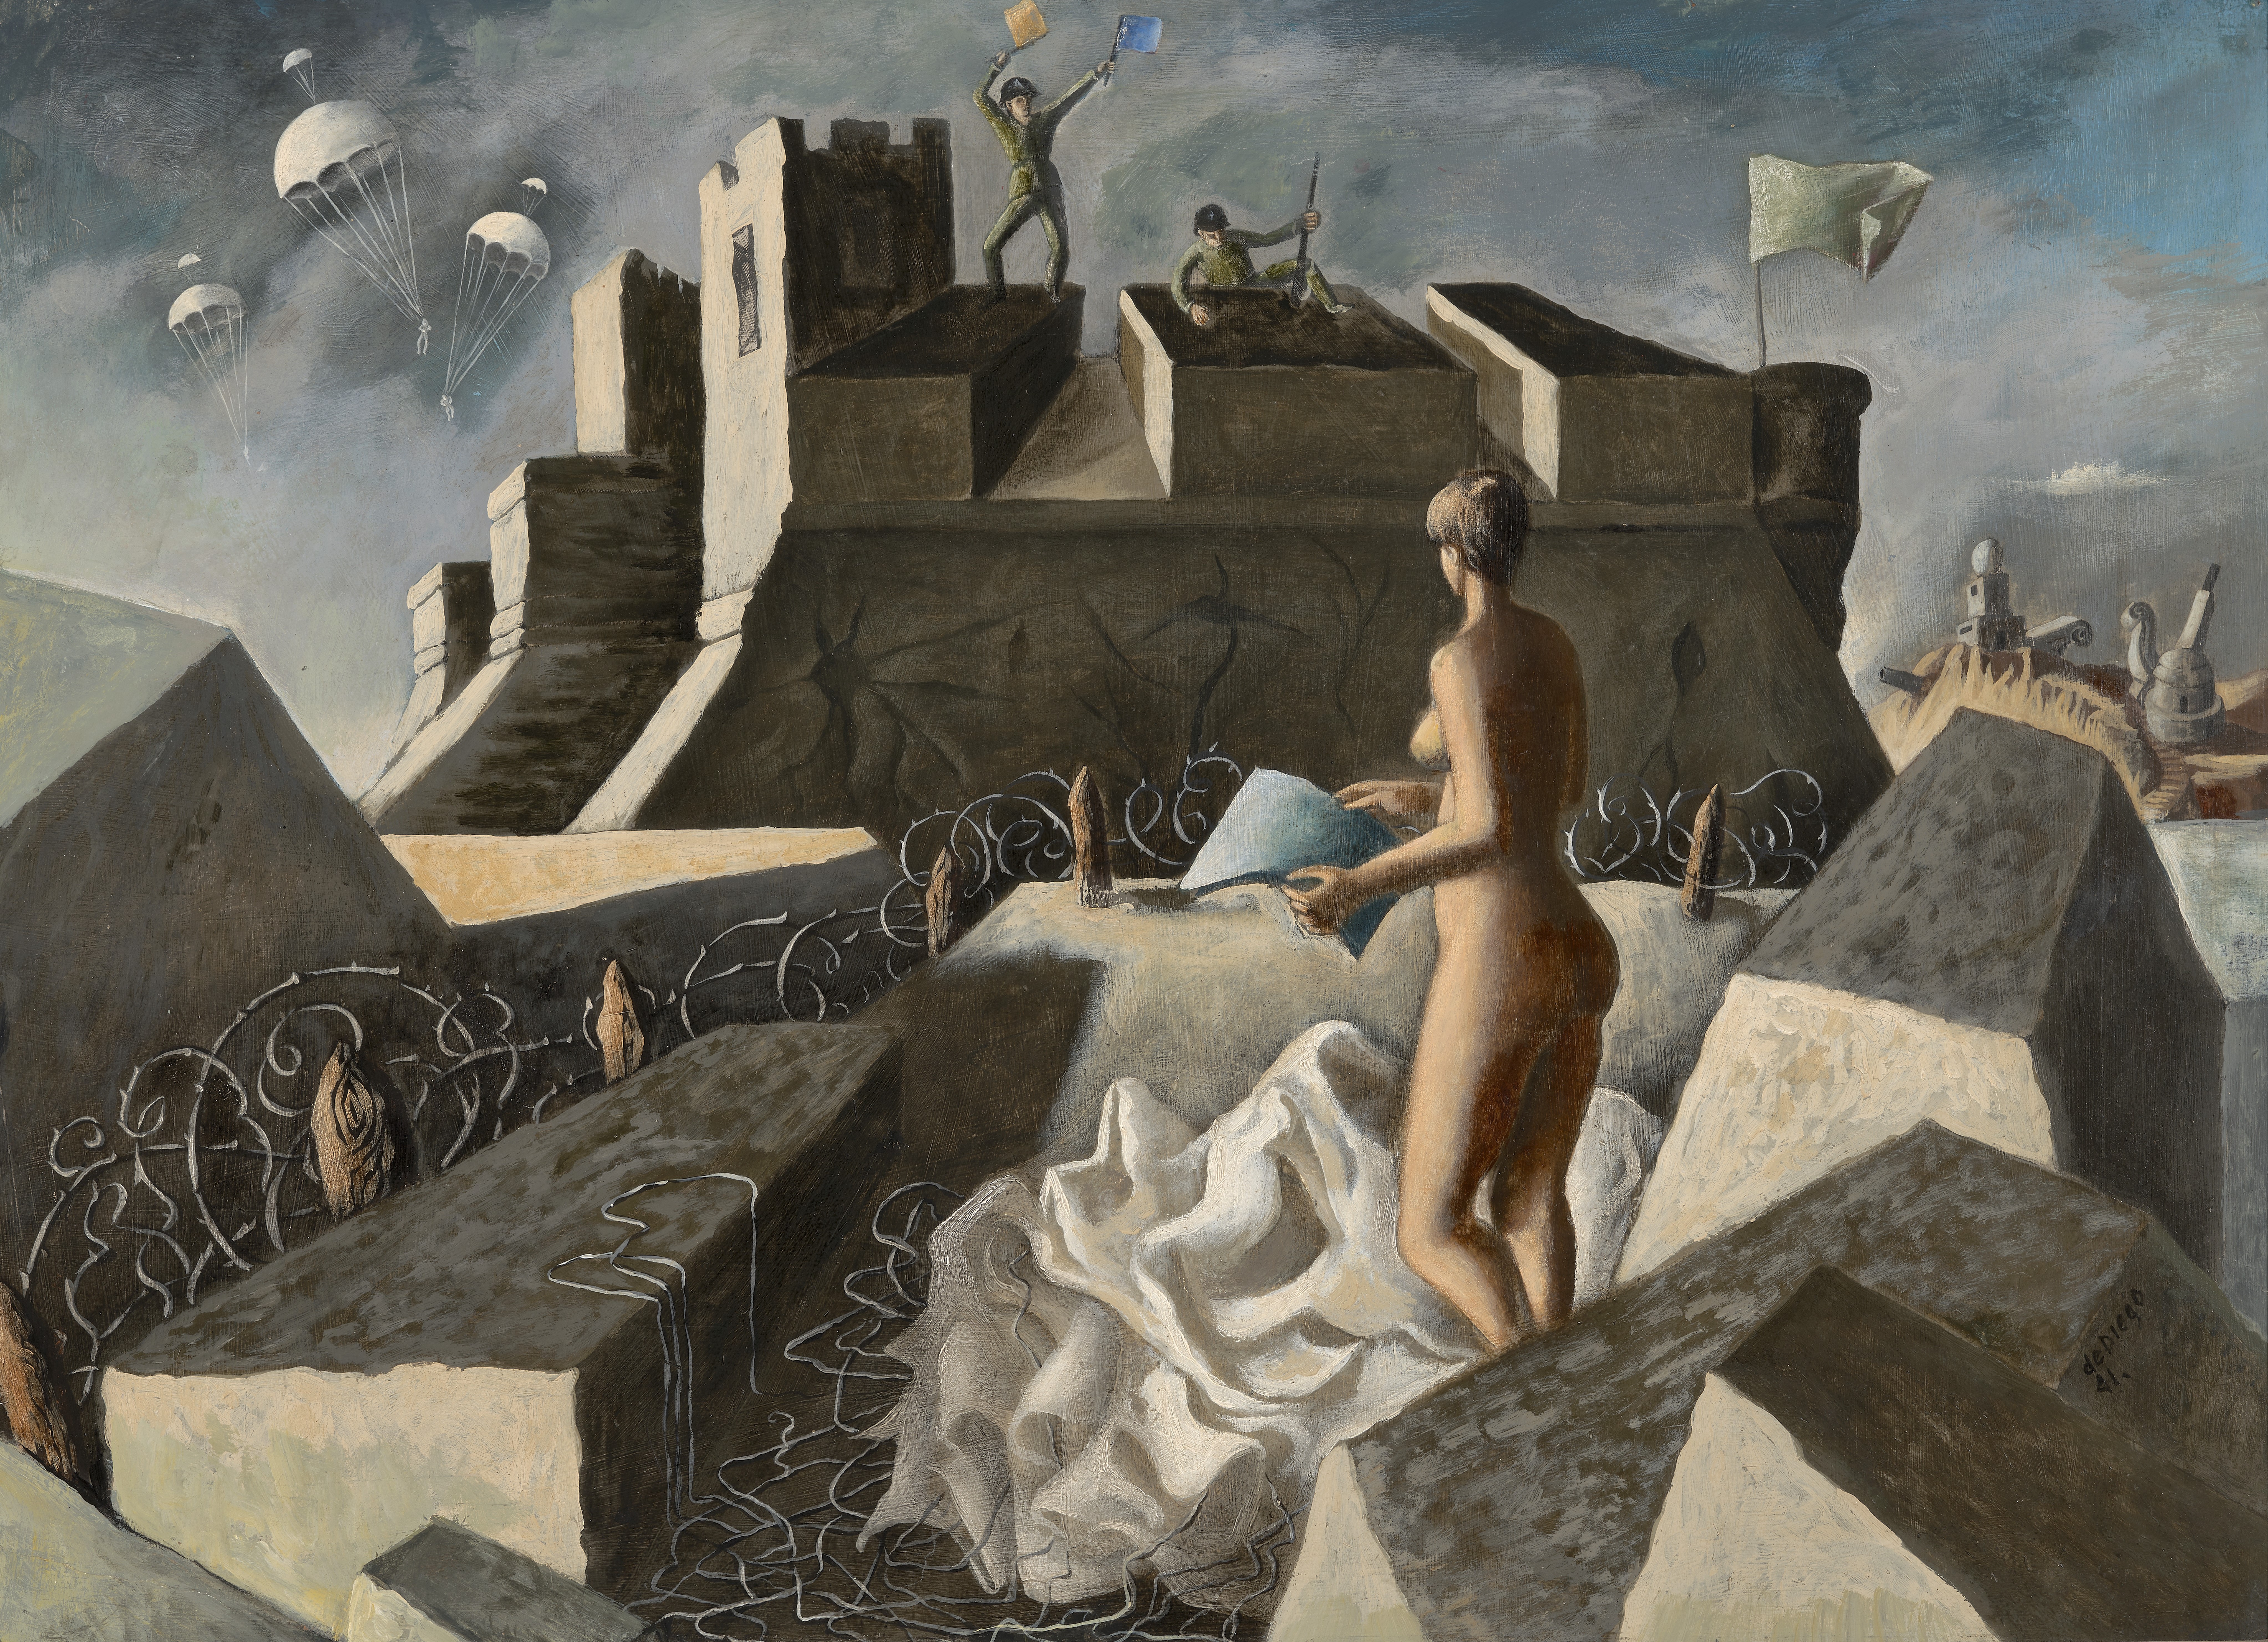 Julio De Diego (1900-1979), Beauty and the Beasts, 1941. Oil on panel, 20.5" x 27.75". From the collection of Sandra and Bram Dijkstra.